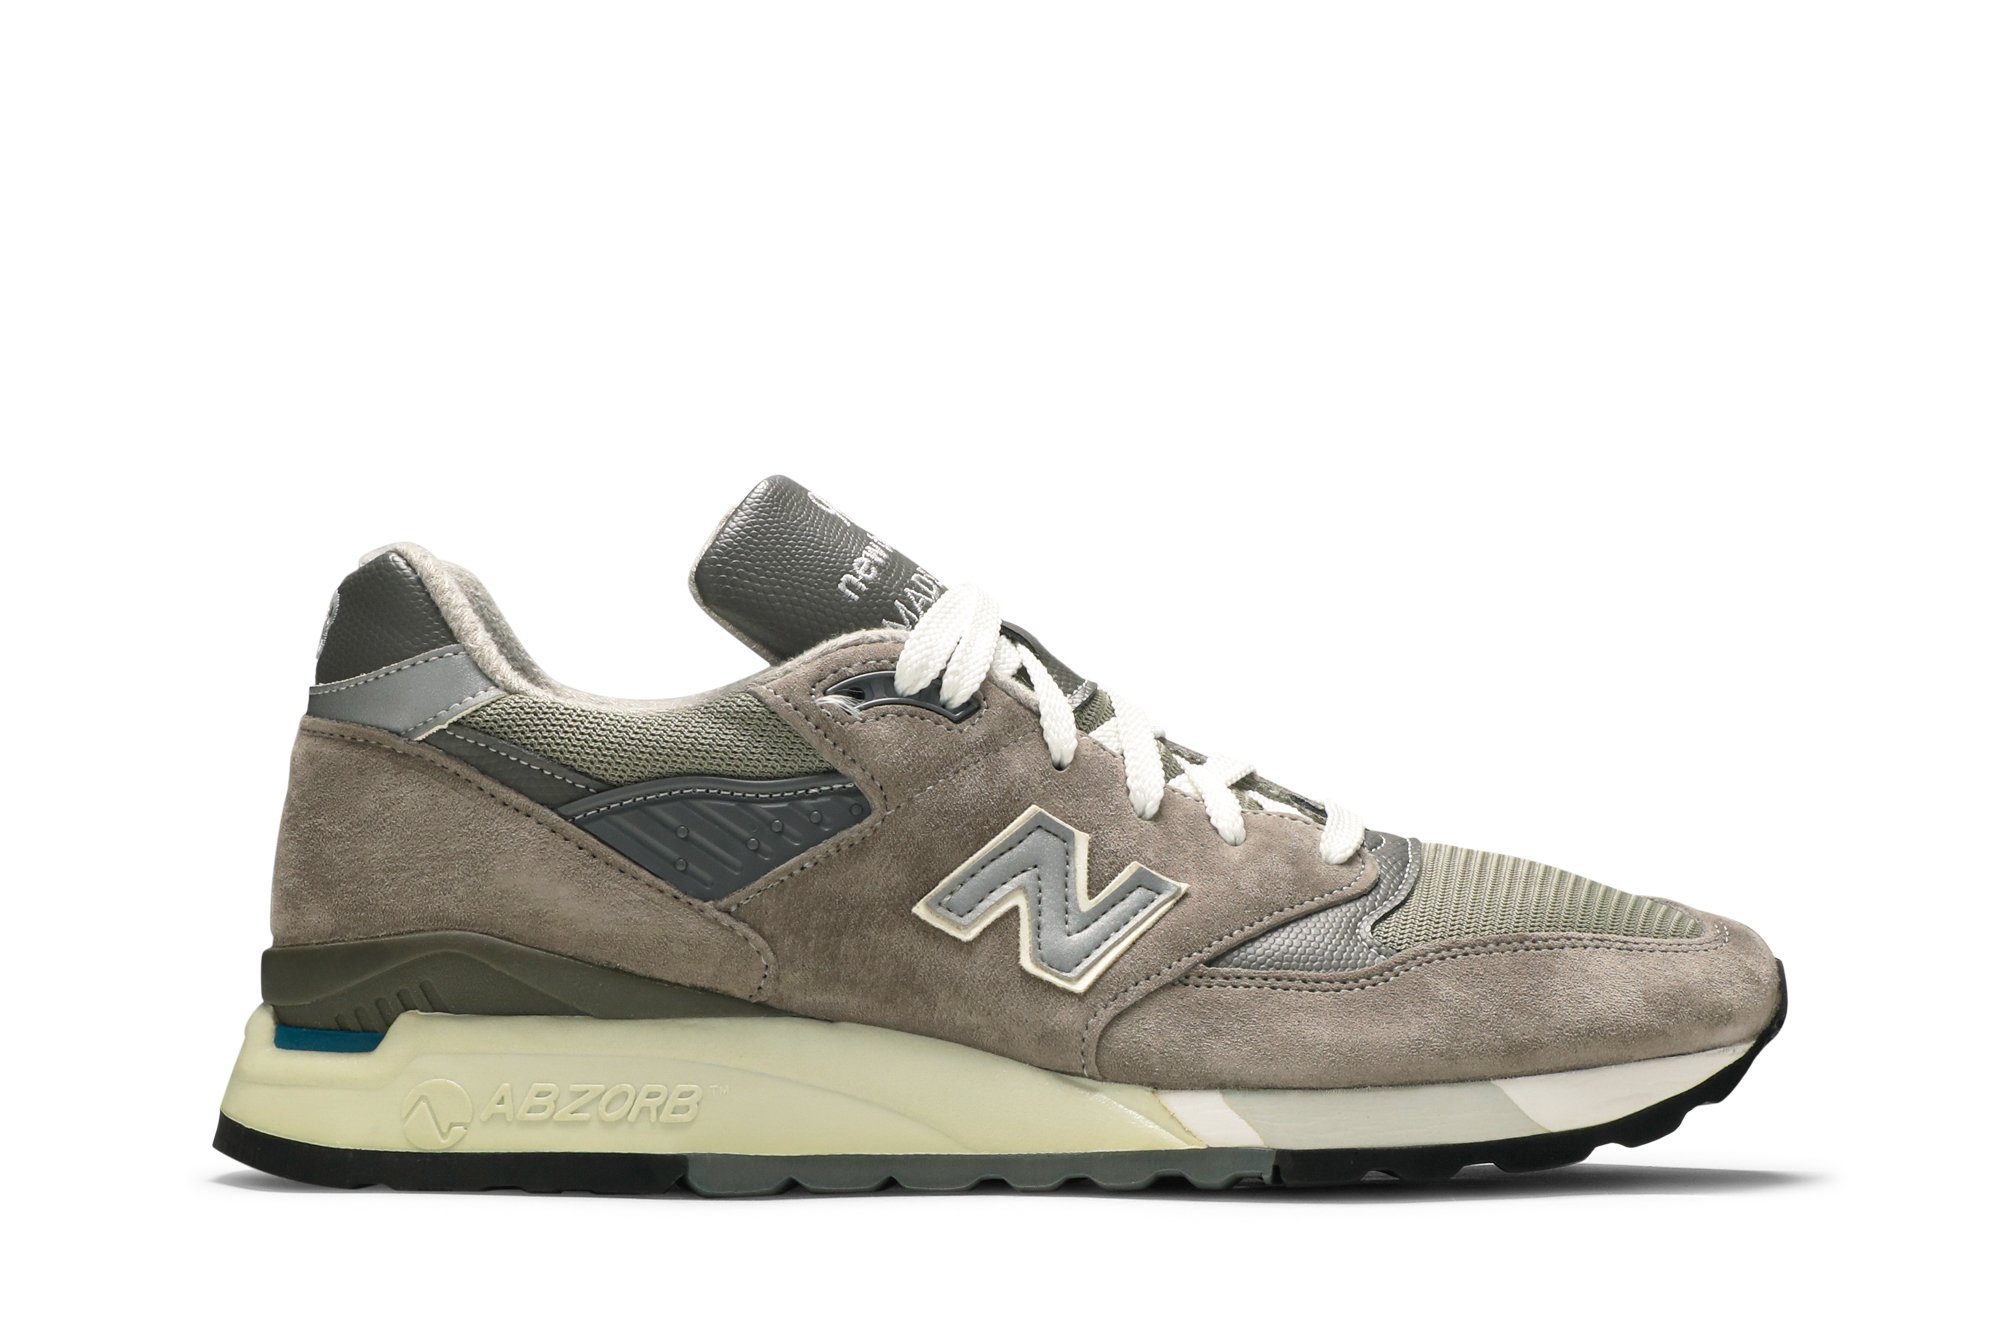 Prepare for the Concepts x New Balance 998 